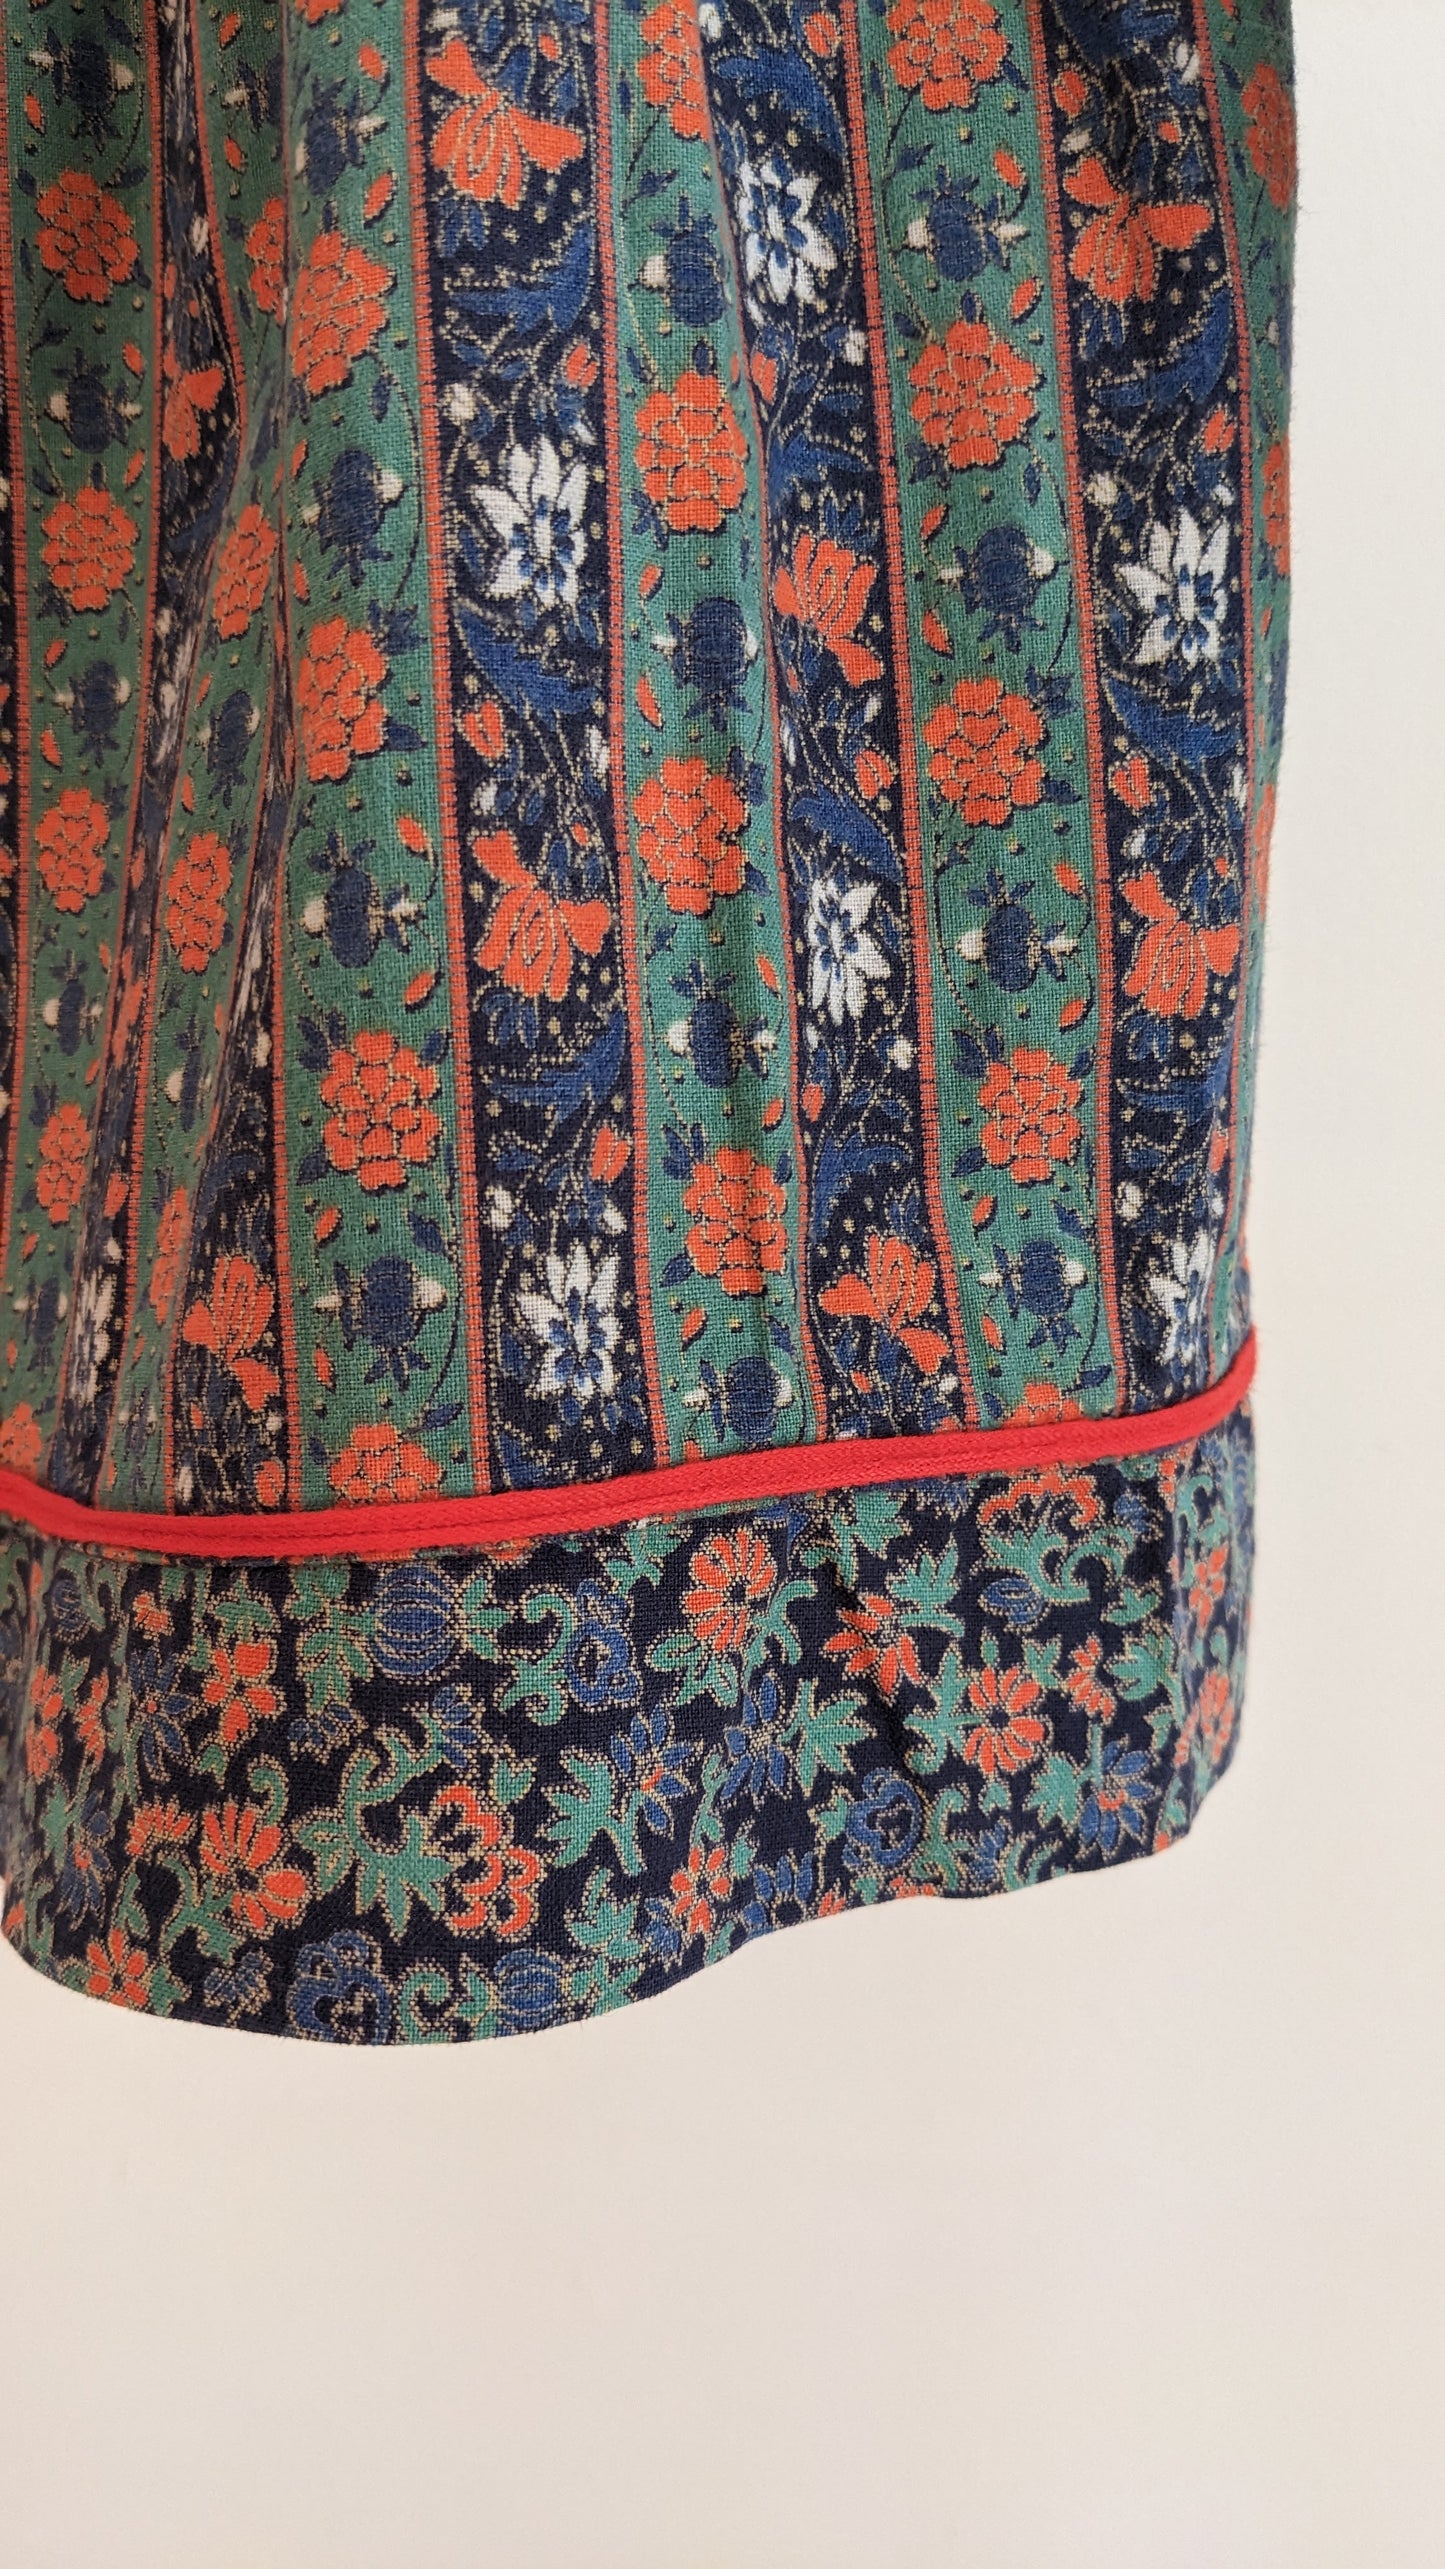 '70 folklore blue green and red dress